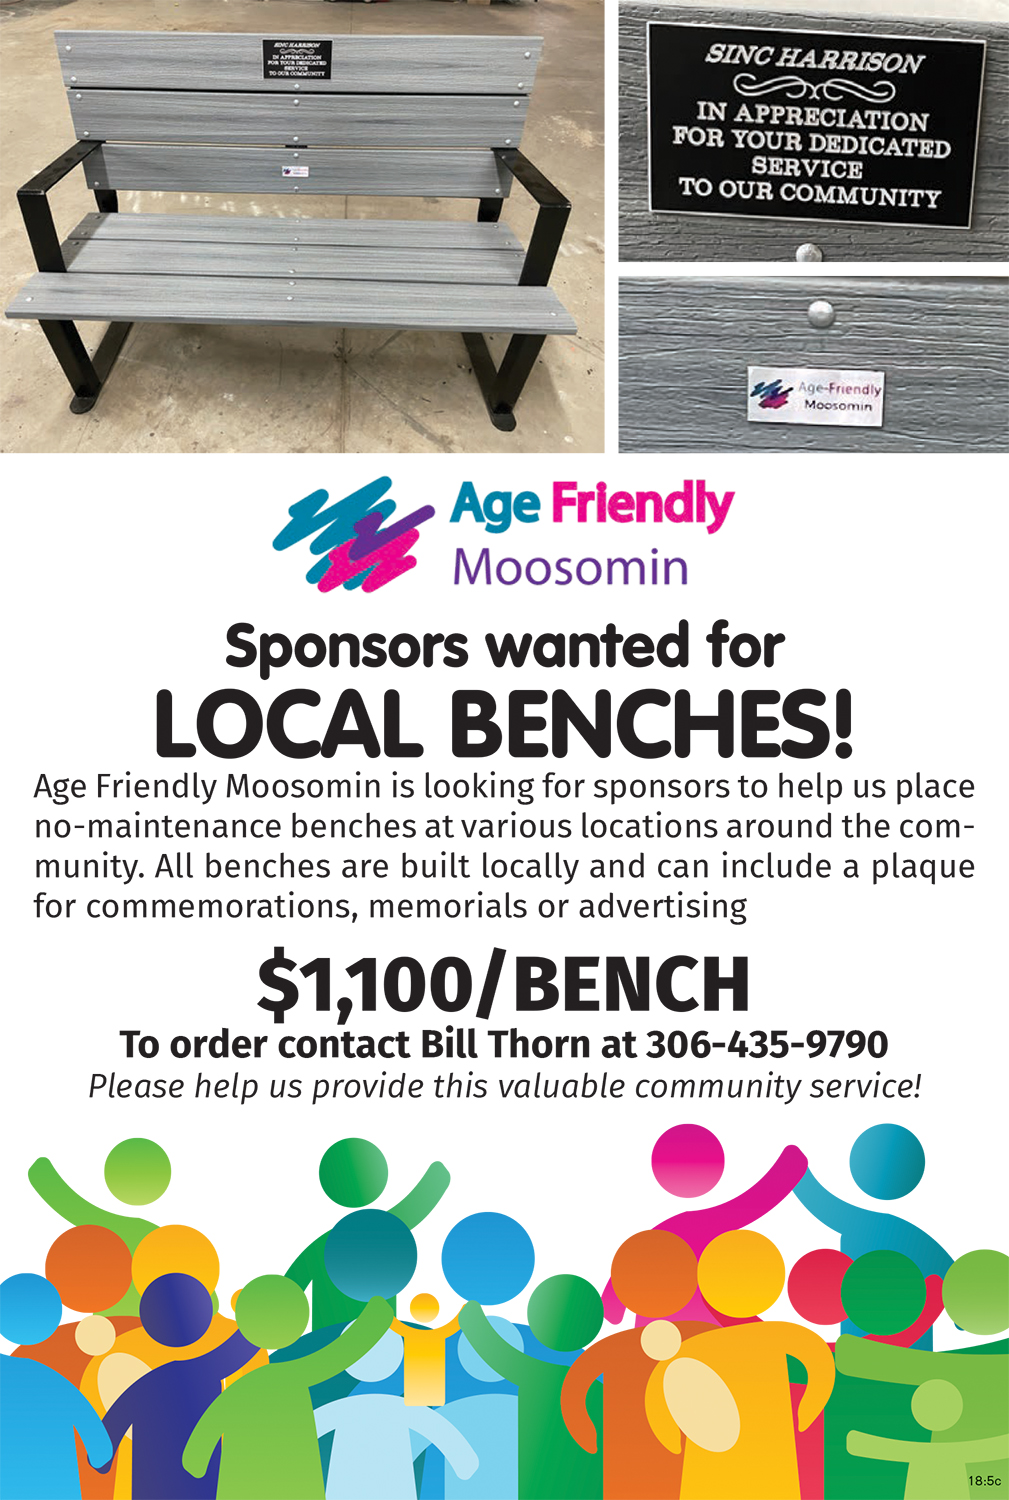 Moosomin Age Friendly Bench Sponsors Wanted